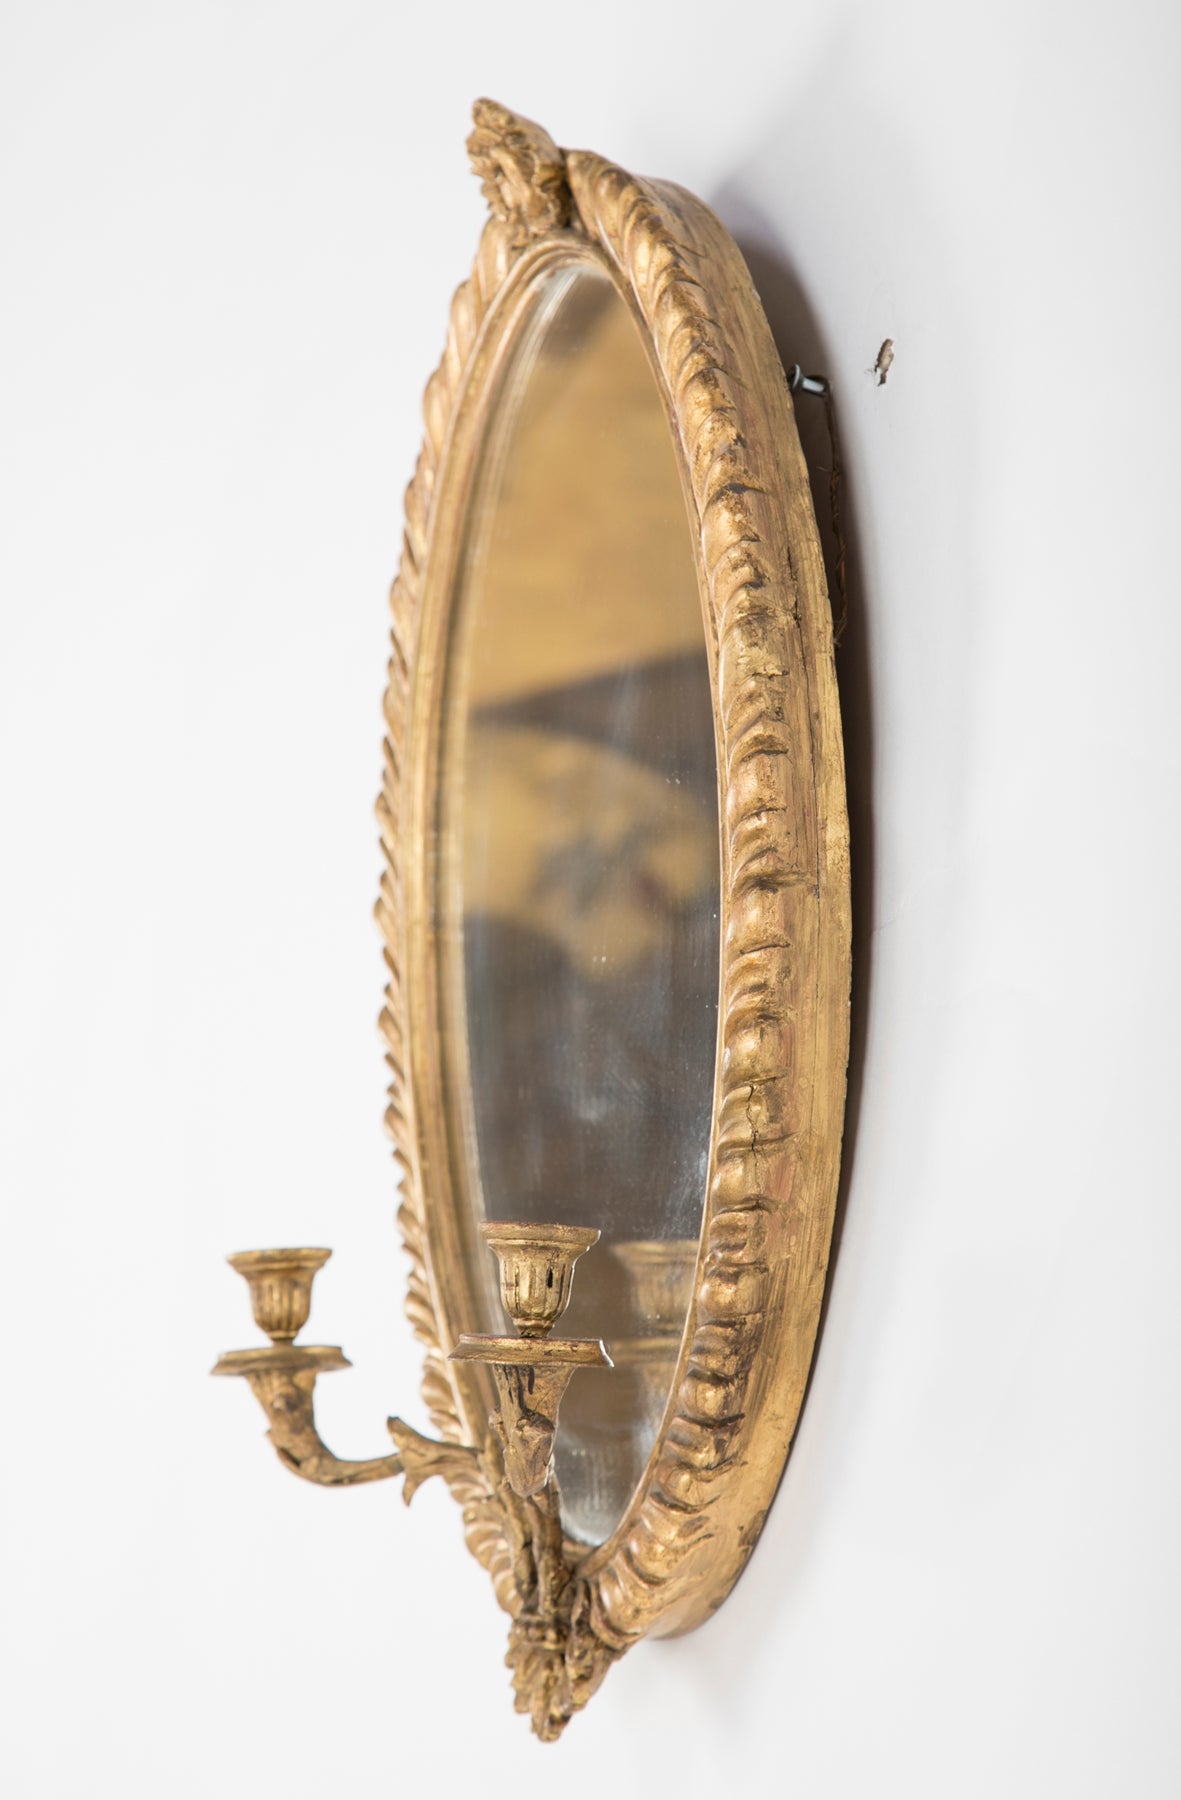 Regency Period Pair of Carved & Gilt Mirrored Sconces